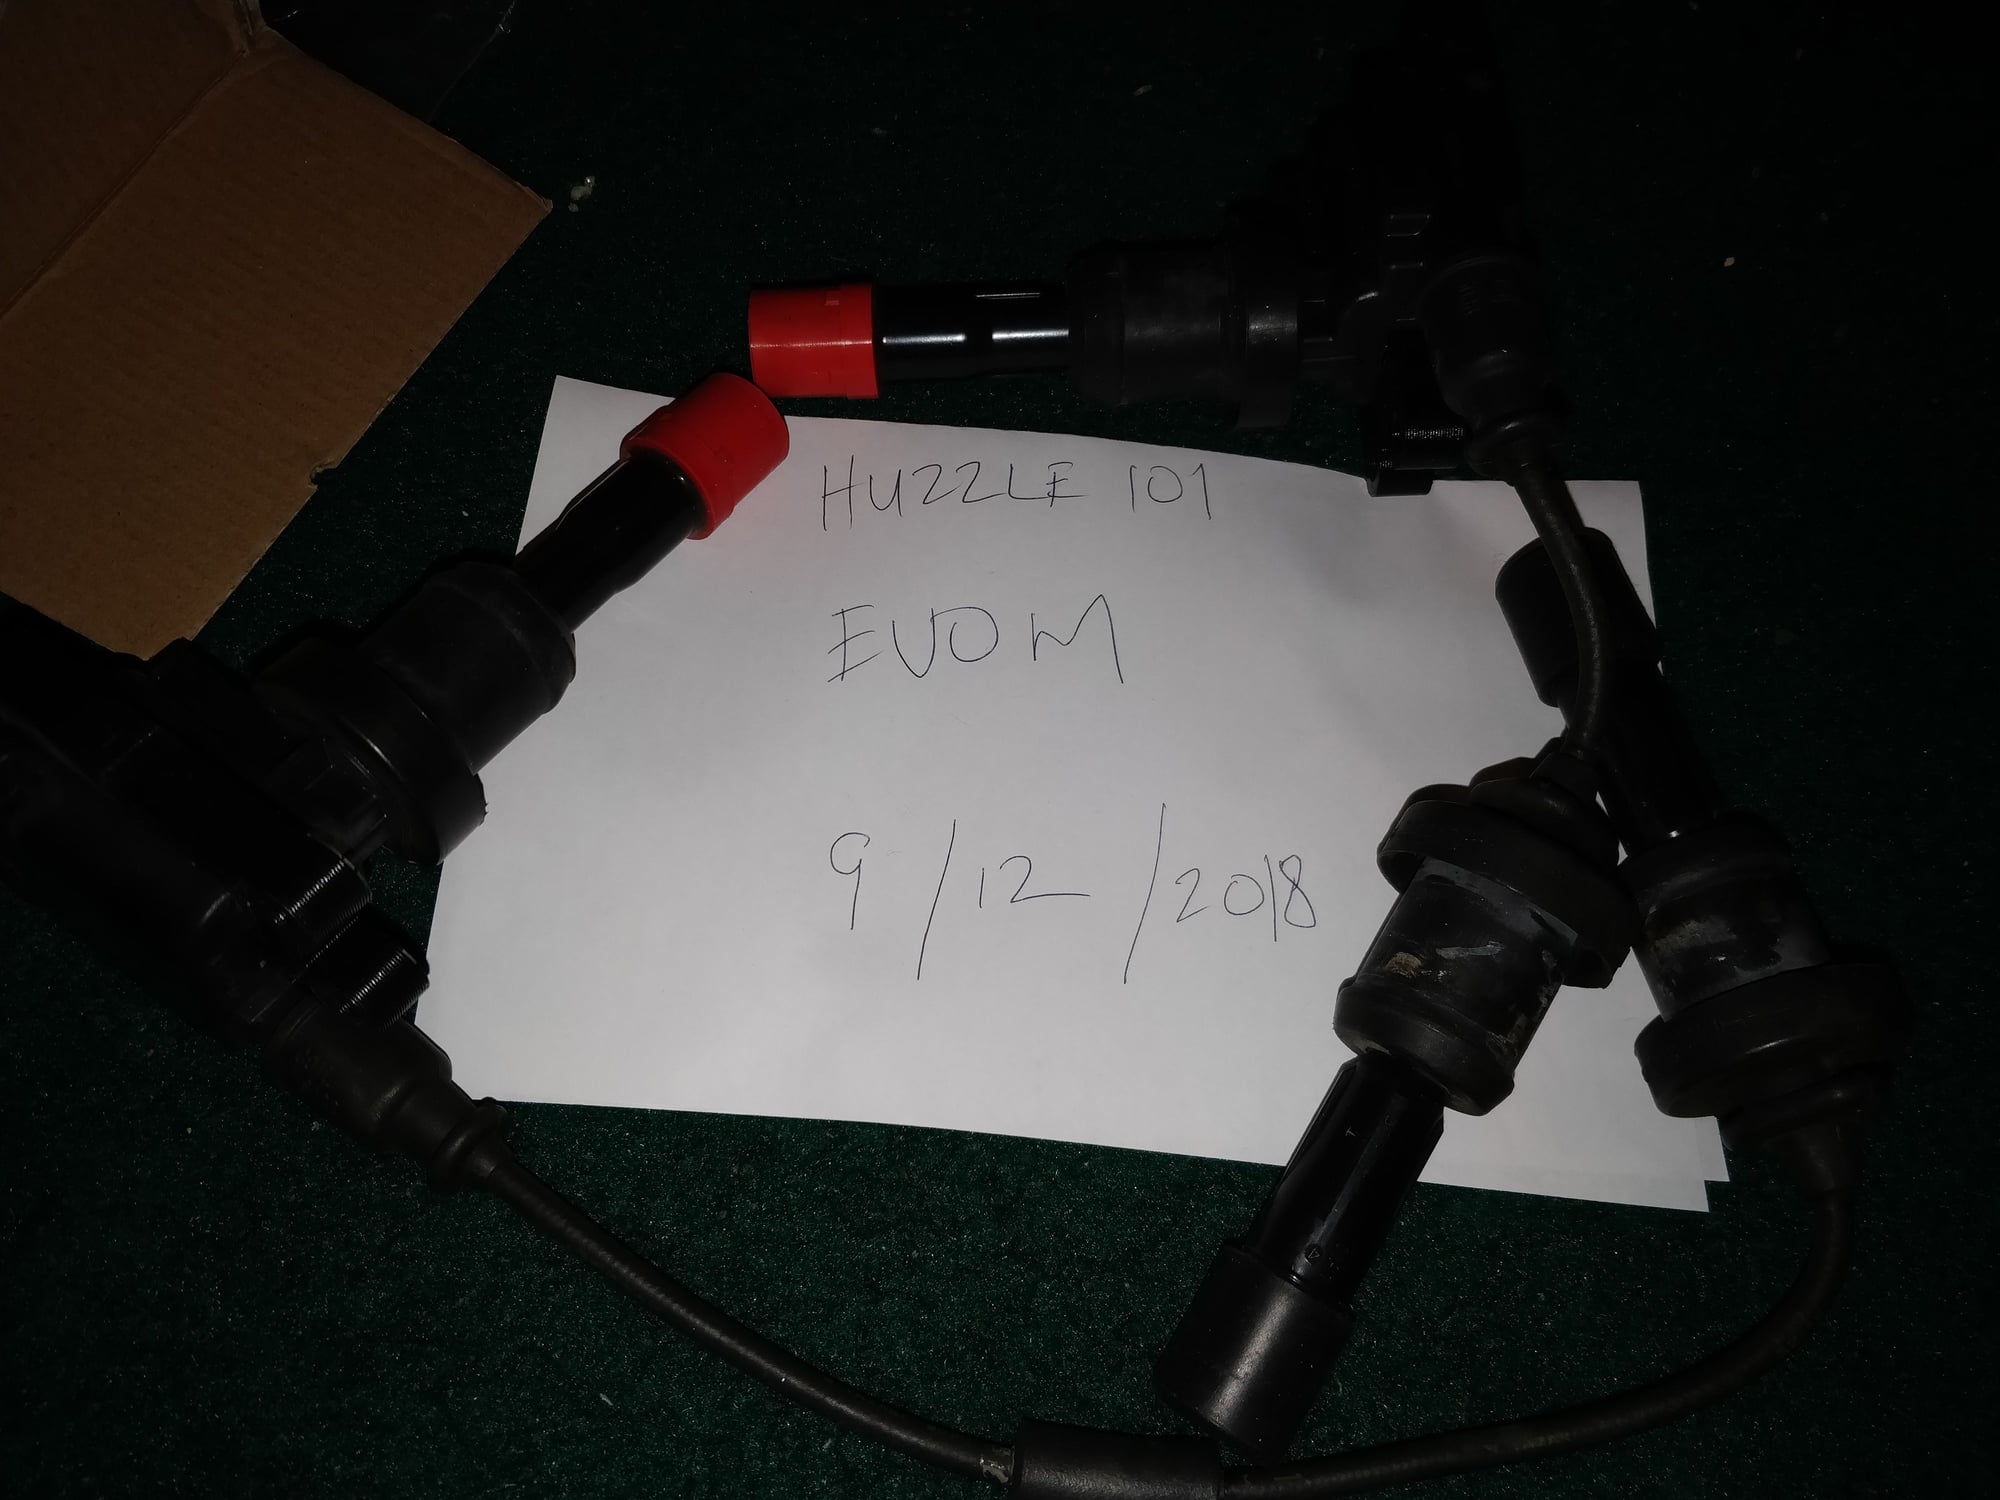 Accessories - Sale Out - AMS fuel rail and a few other parts - New - 2003 to 2006 Mitsubishi Lancer Evolution - Sunrise, FL 33313, United States